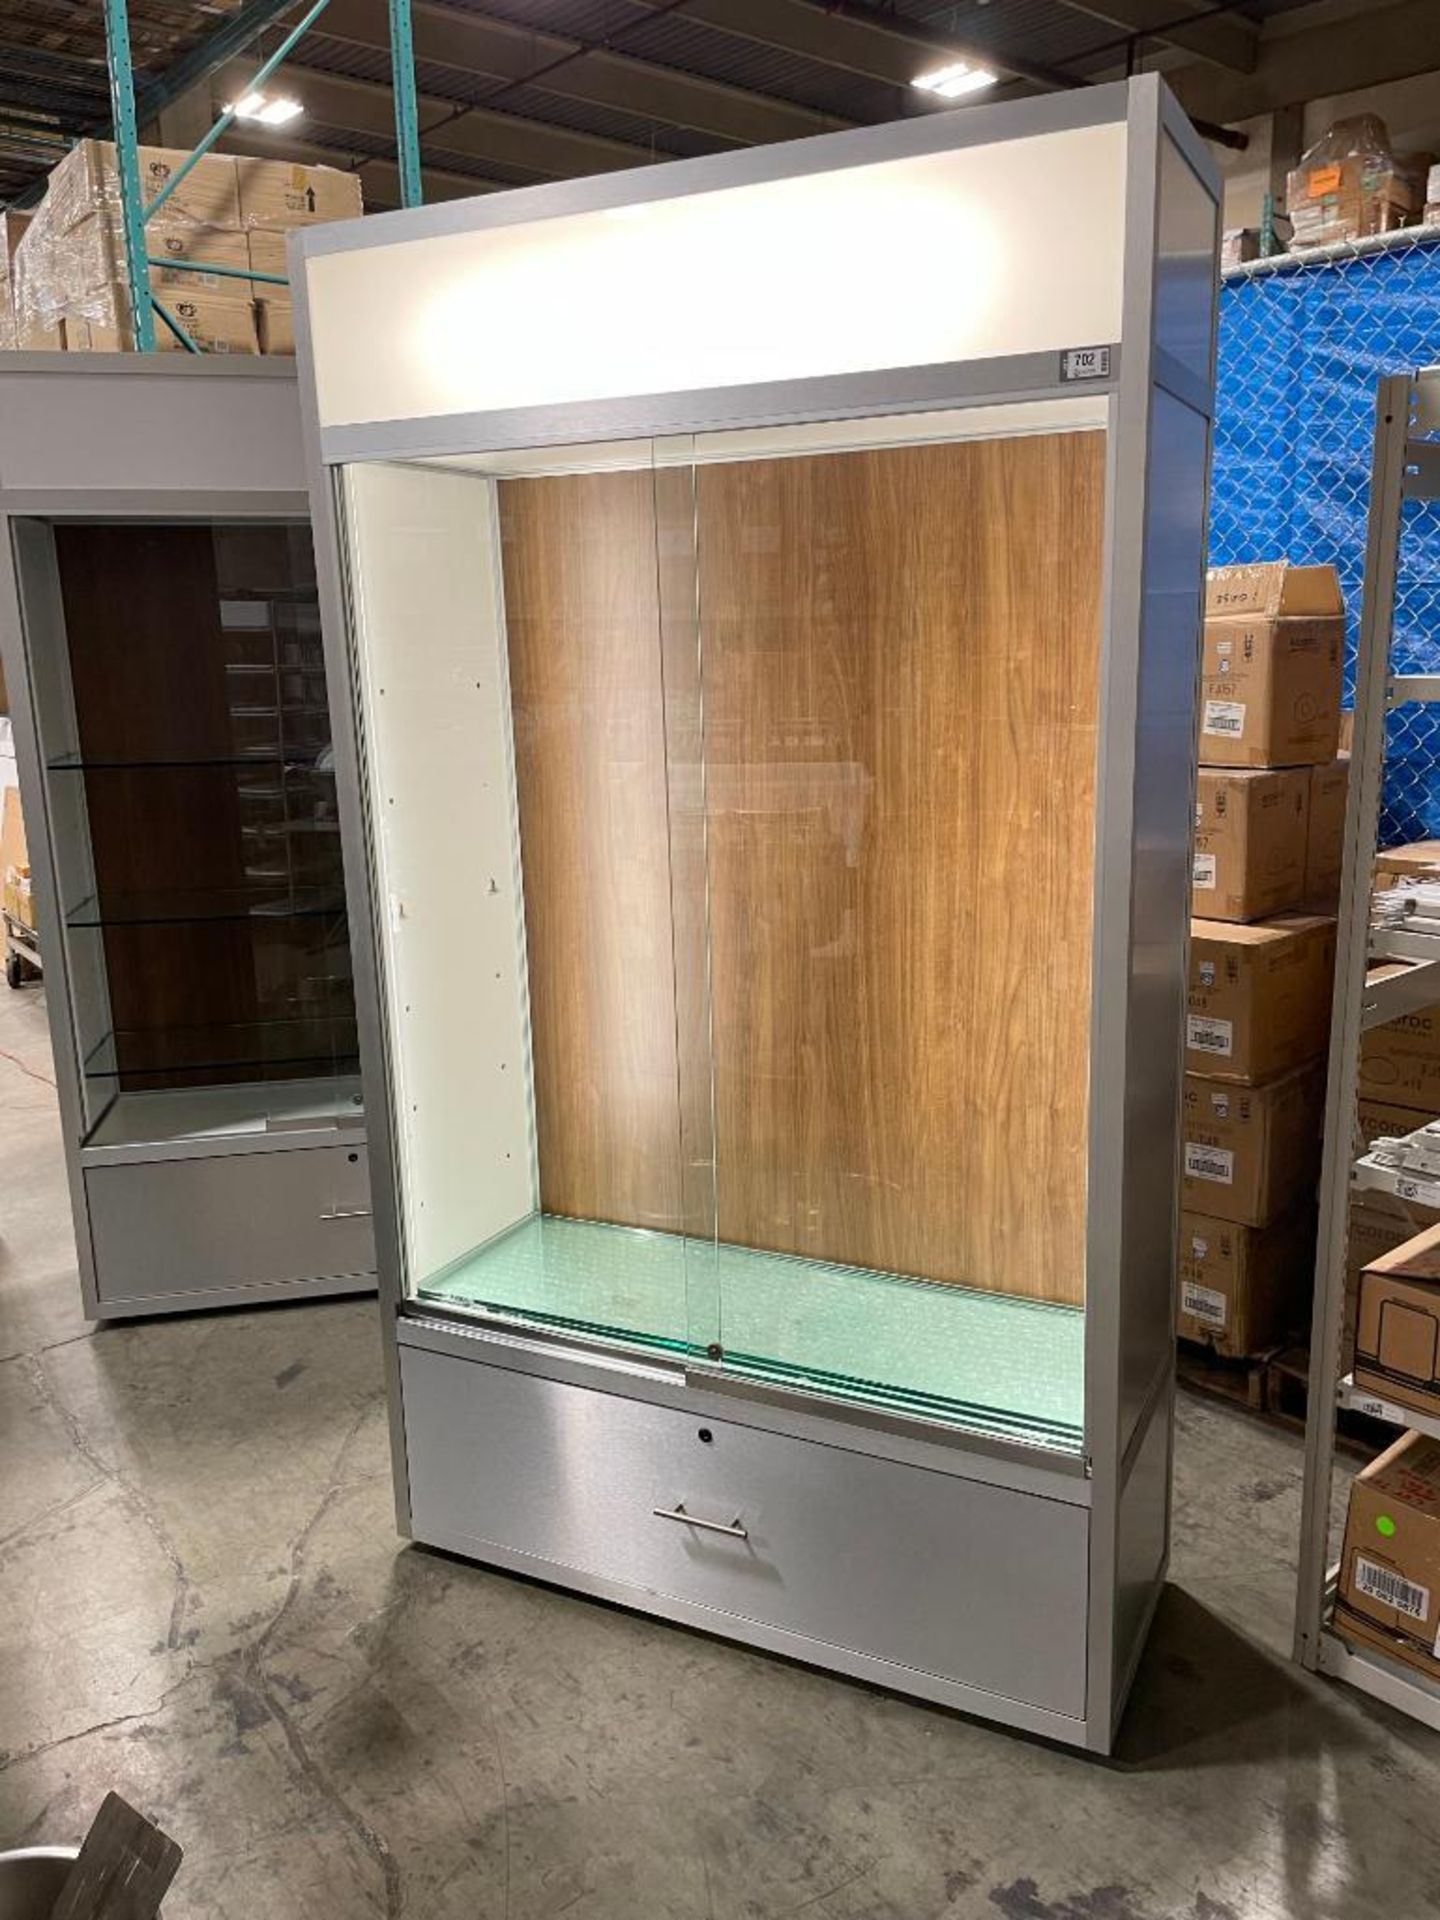 48" GLASS SLIDING DOOR DISPLAY CABINET WITH 1-DRAWER AND LIGHTING - Image 2 of 8